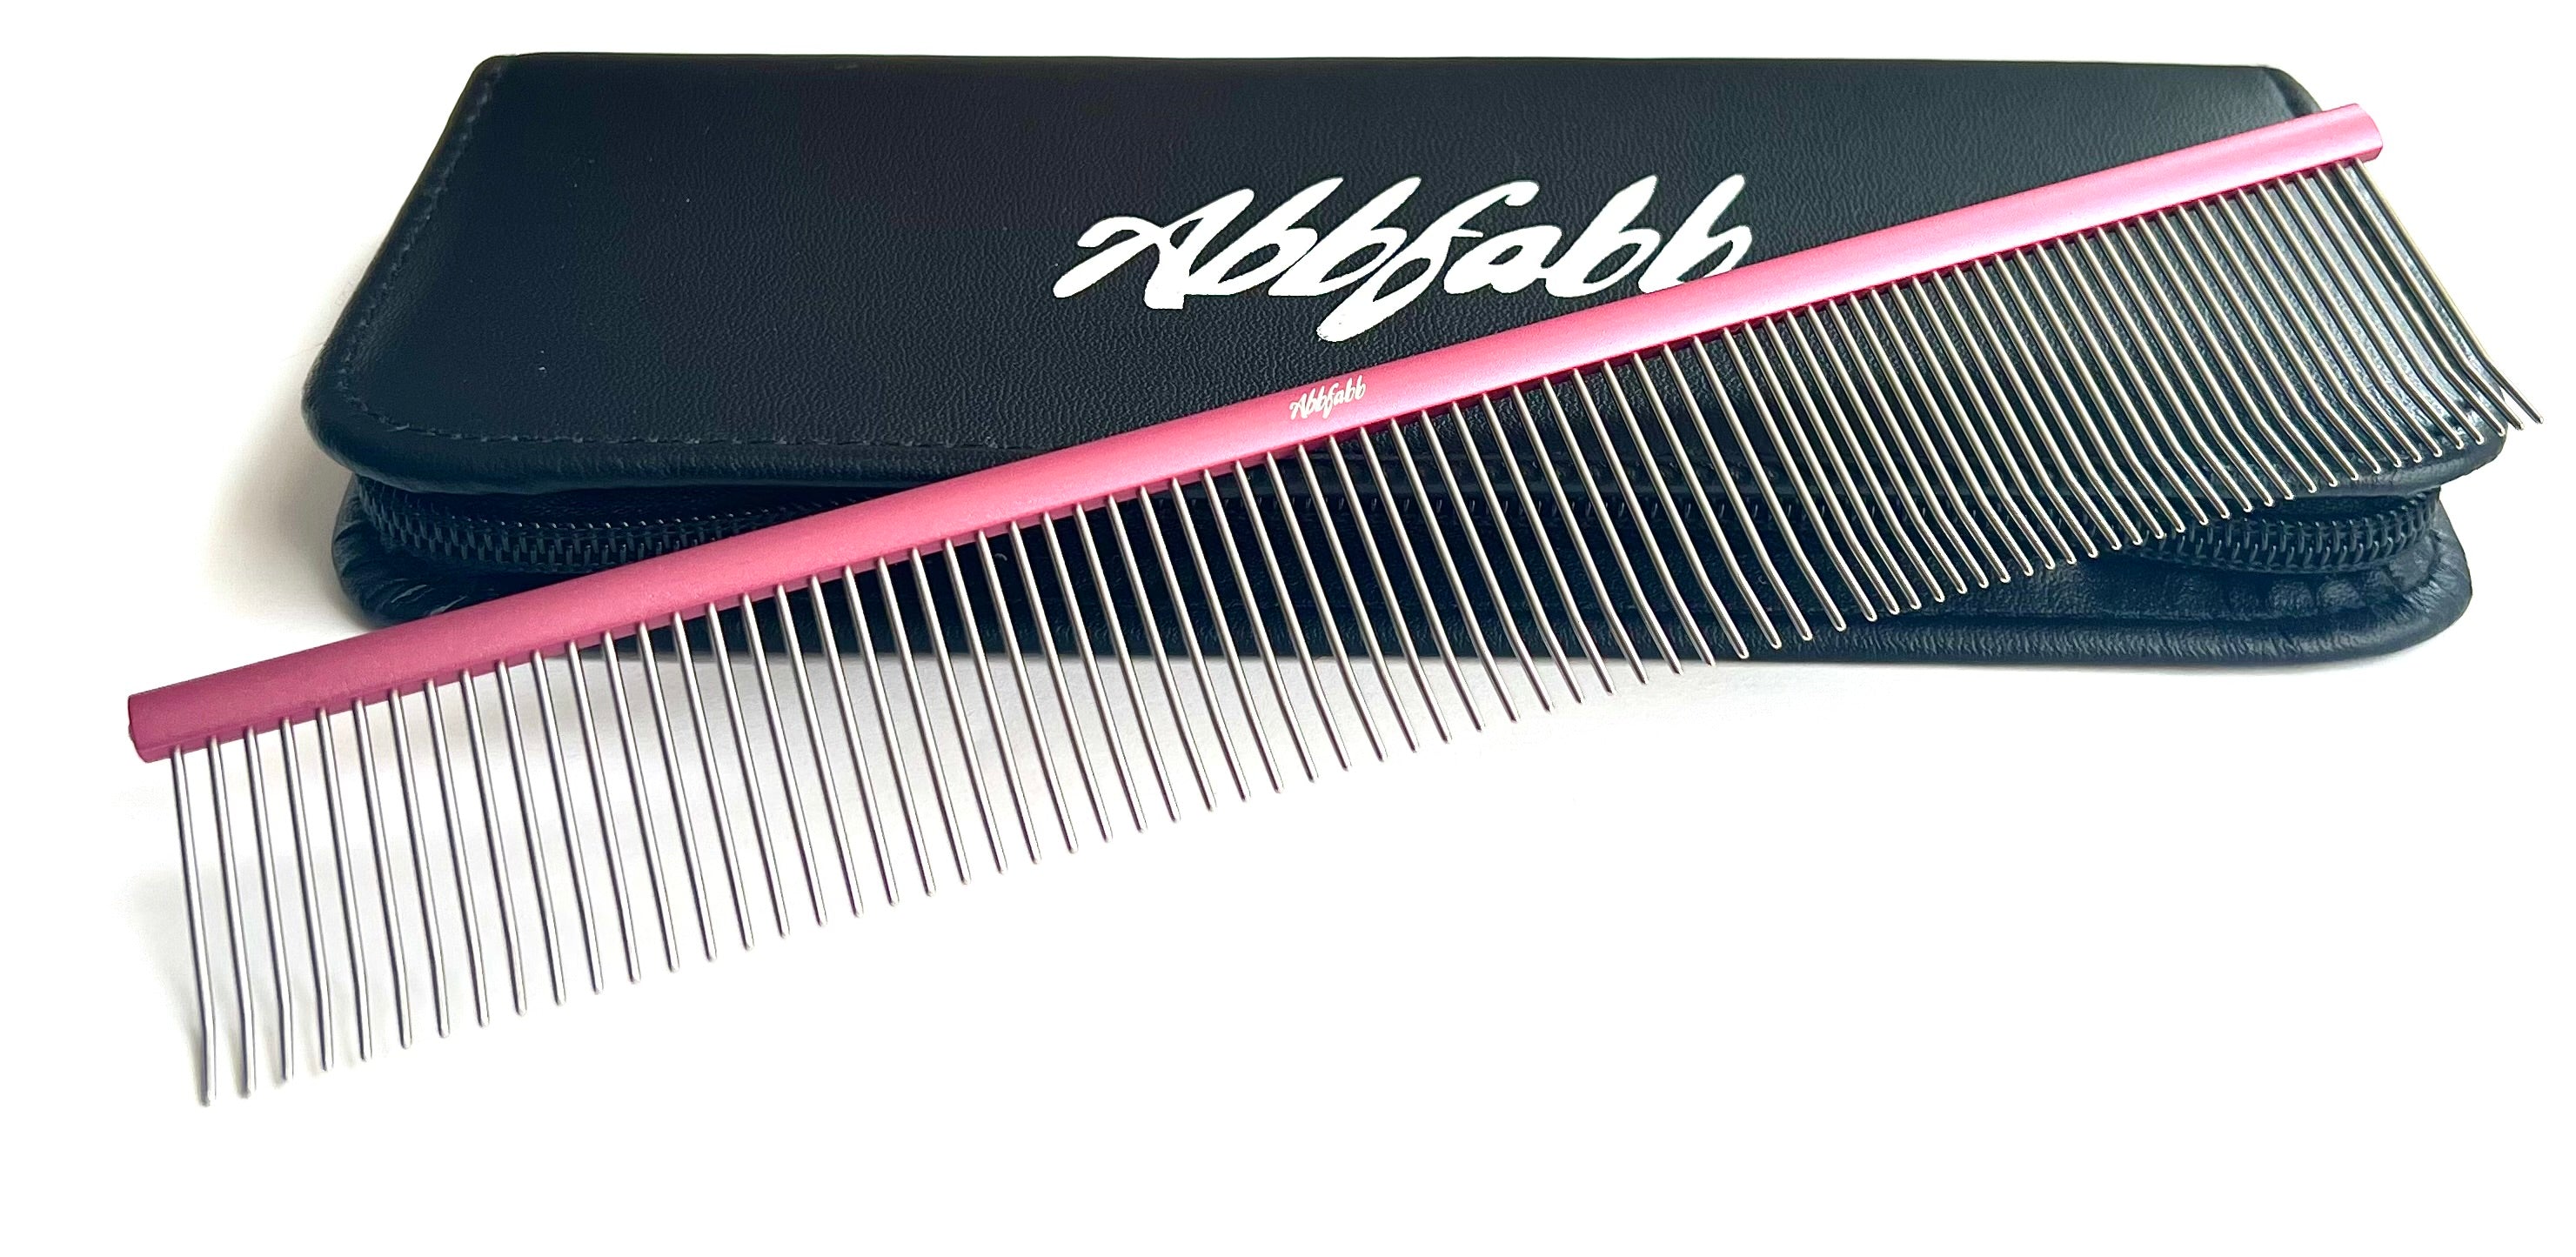 finishing comb for dog grooming by Abbfabb Grooming Scissors